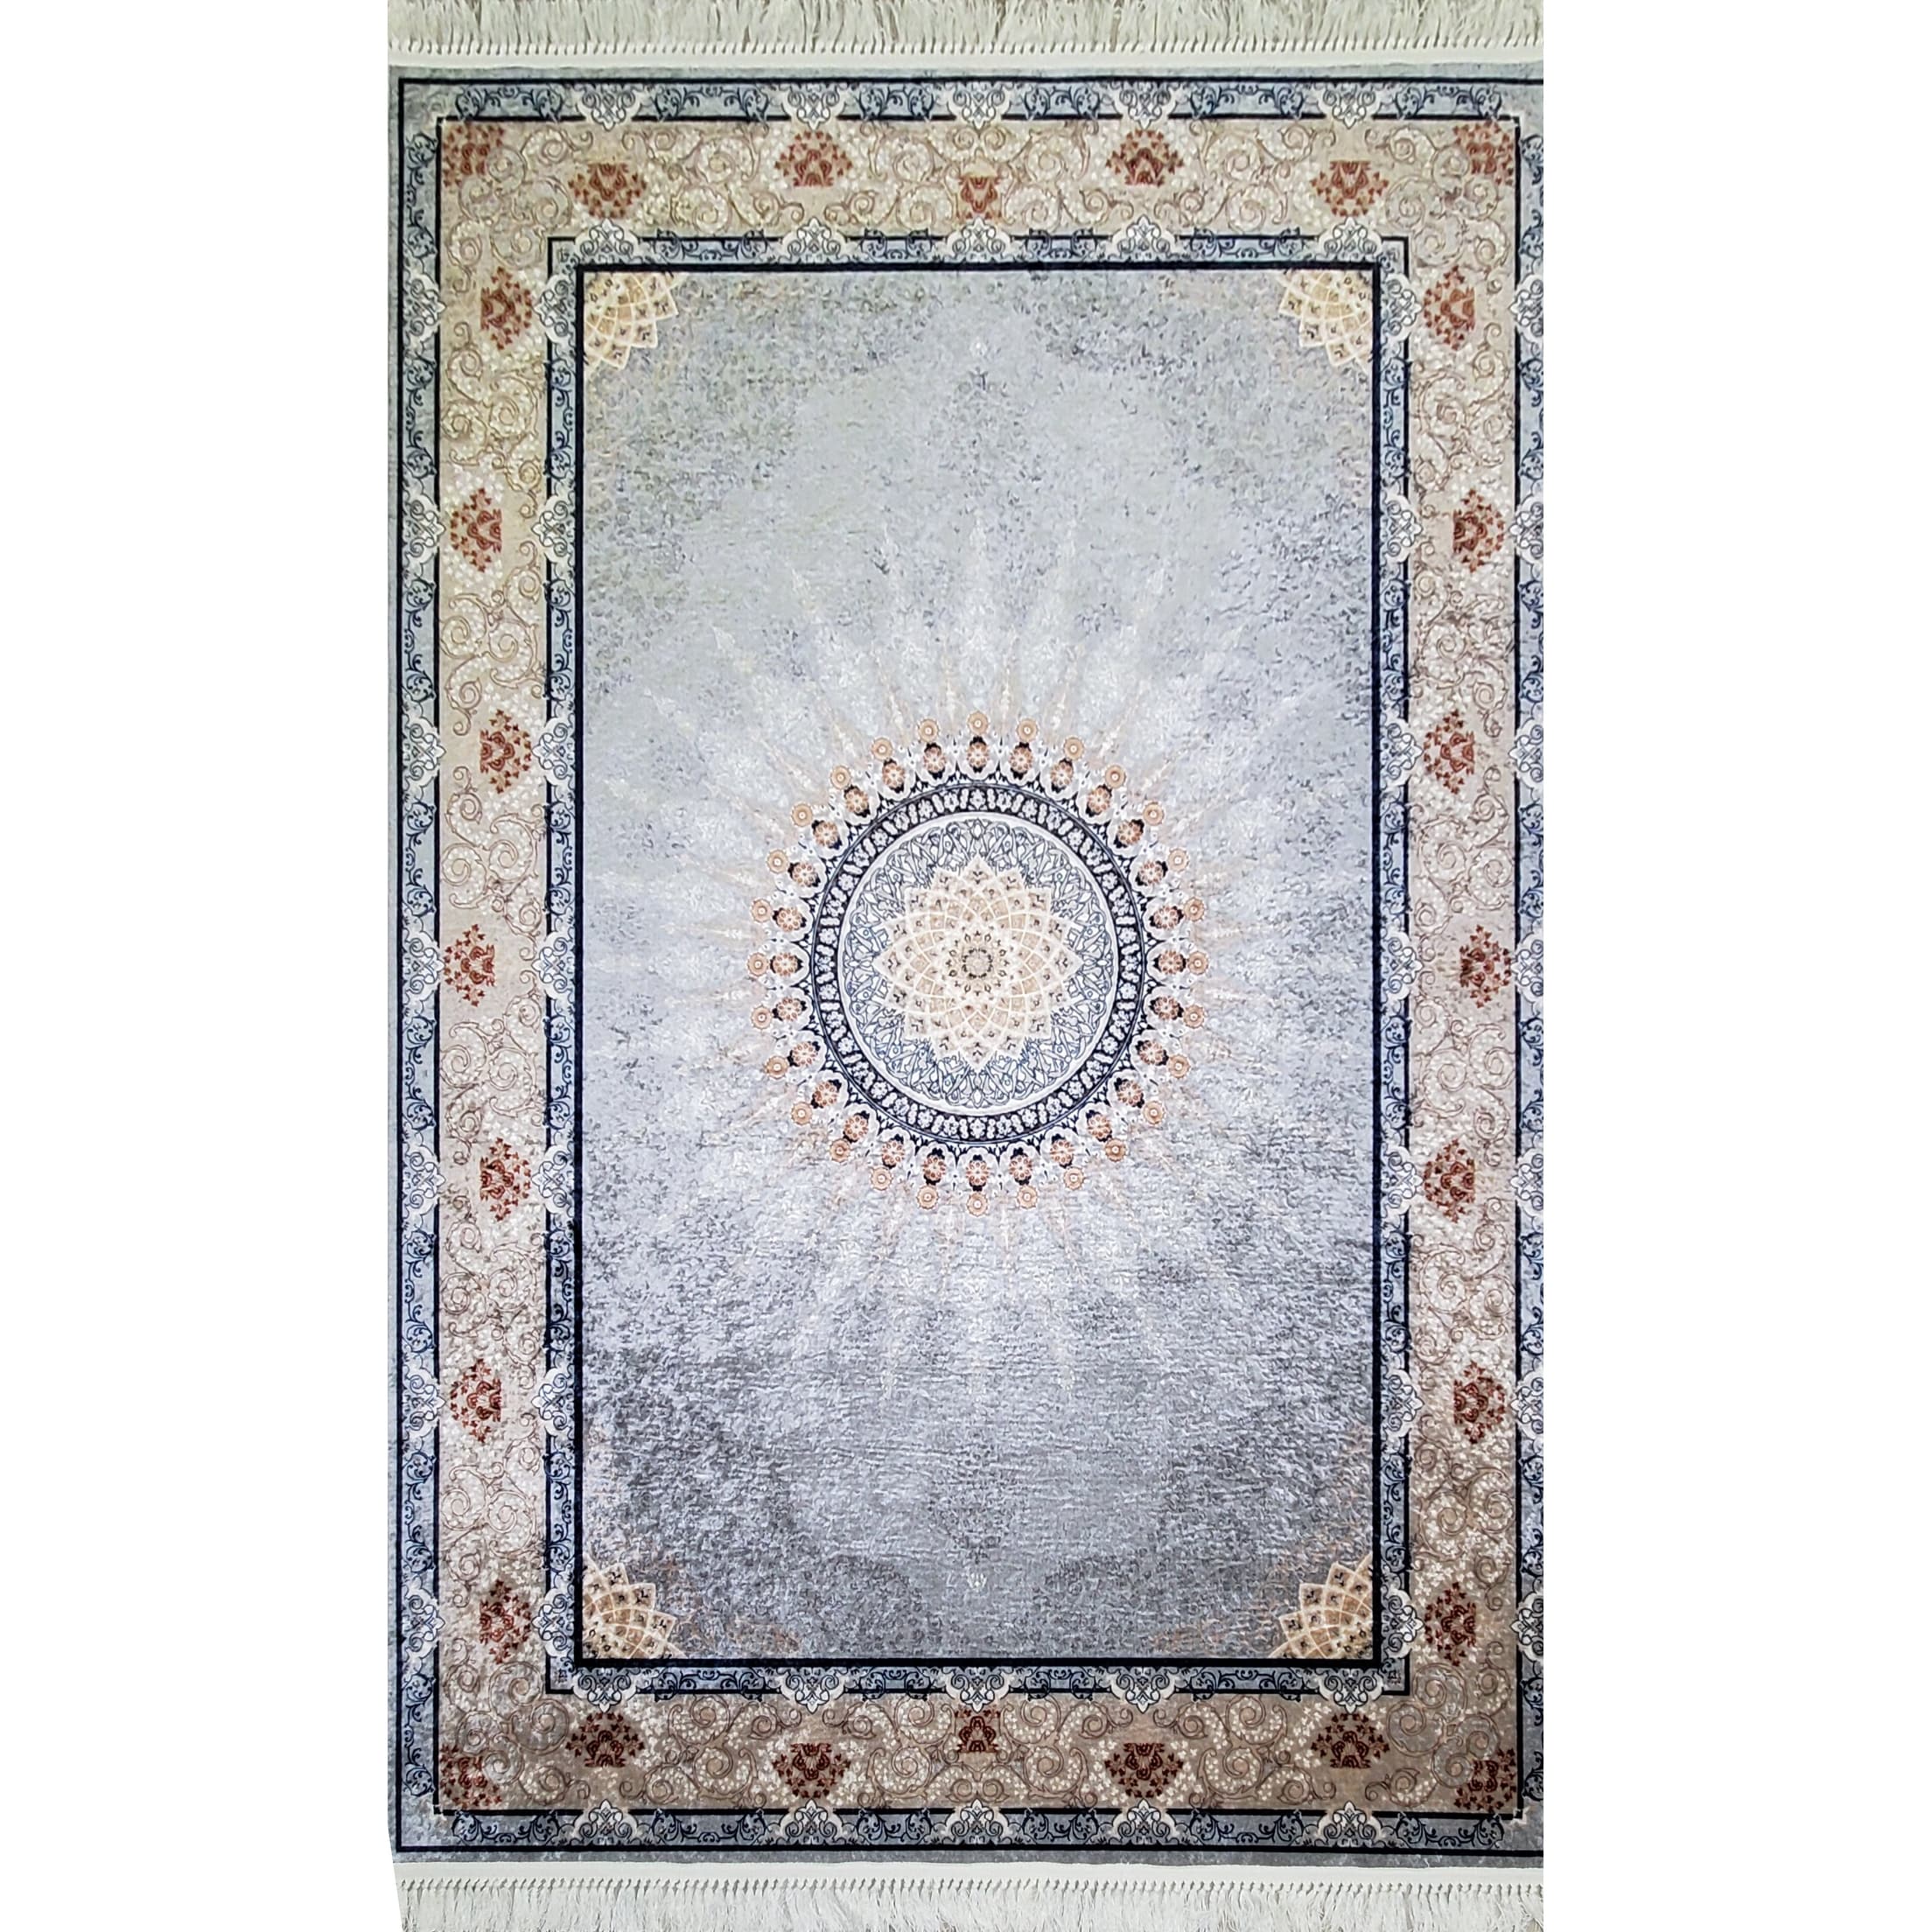 https://ak1.ostkcdn.com/images/products/is/images/direct/65c3df4a9c4210eb46a61af7836b94d0706d7b31/La-Dole-Rugs-Blue-Cream-Beige-Bordered-Machine-Washable-Area-Rug-Carpet-For-Living-Room-Bedroom-5x7%2C-8x10%2C-7X9-foot.jpg